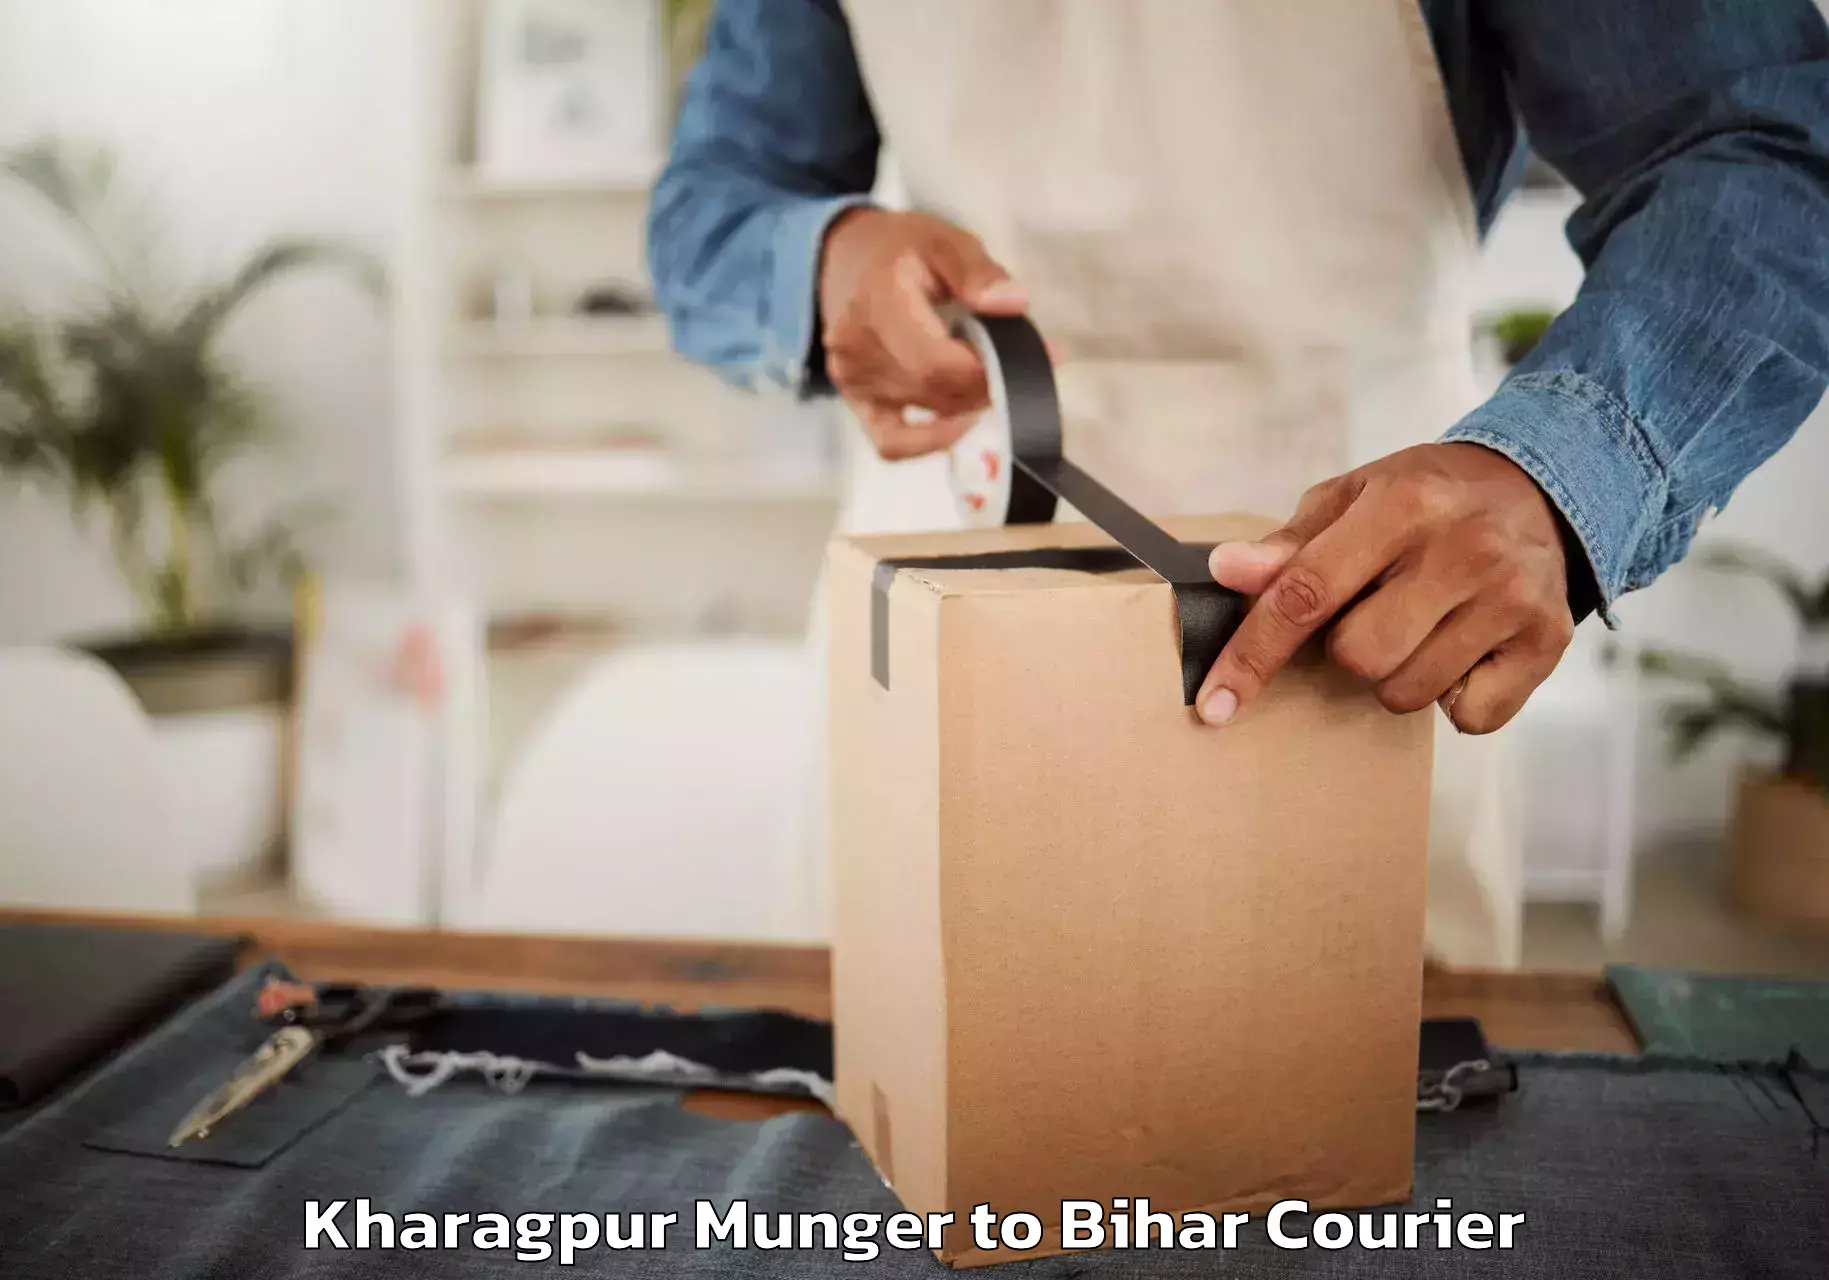 Furniture delivery service in Kharagpur Munger to Ghanshyampur